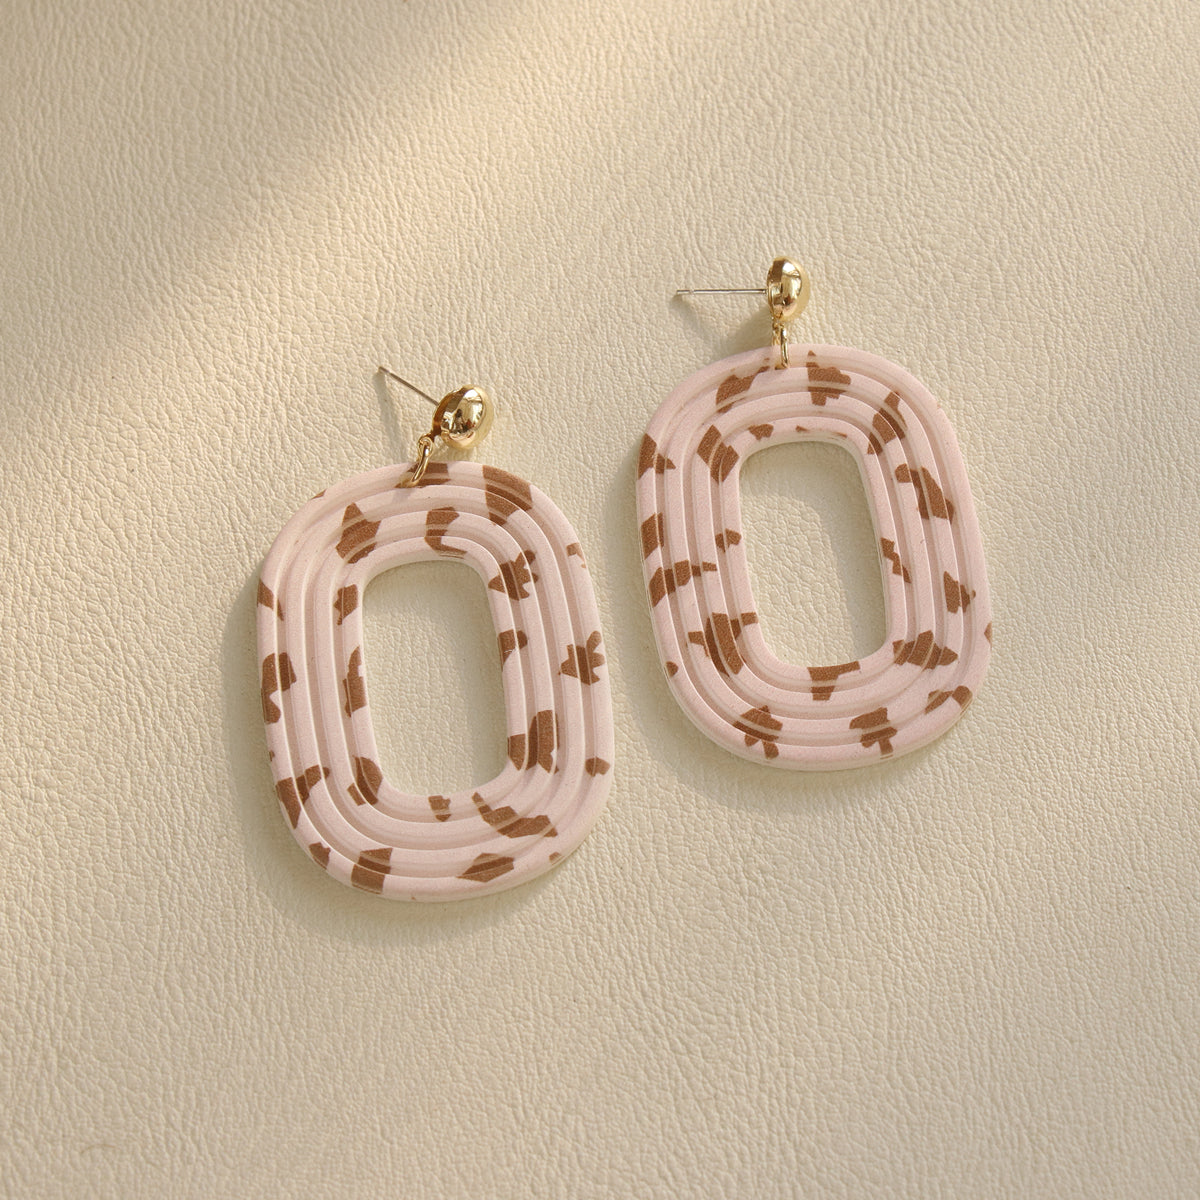 Body Clay Texture Lacquered Acrylic Earrings